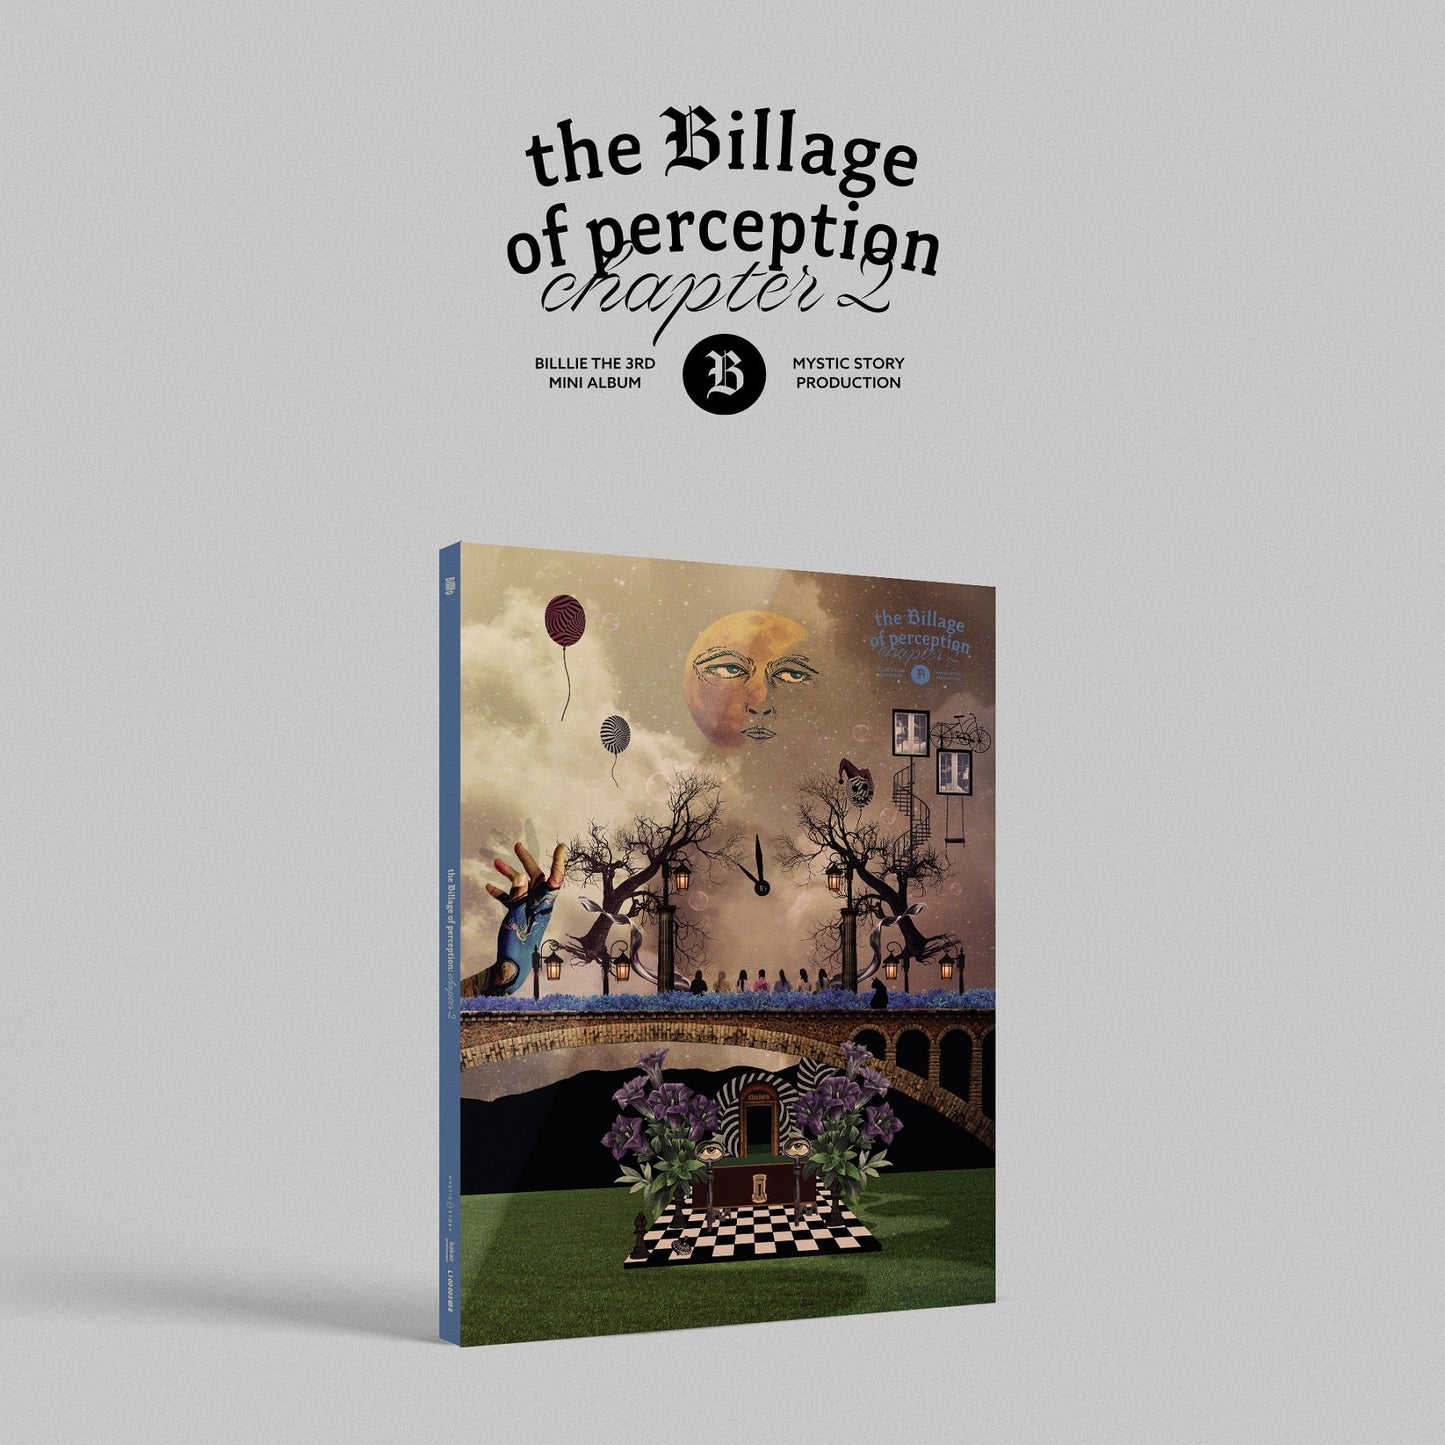 BILLLIE 3RD MINI ALBUM 'THE BILLAGE OF PERCEPTION : CHAPTER TWO' QUIES VERSION COVER